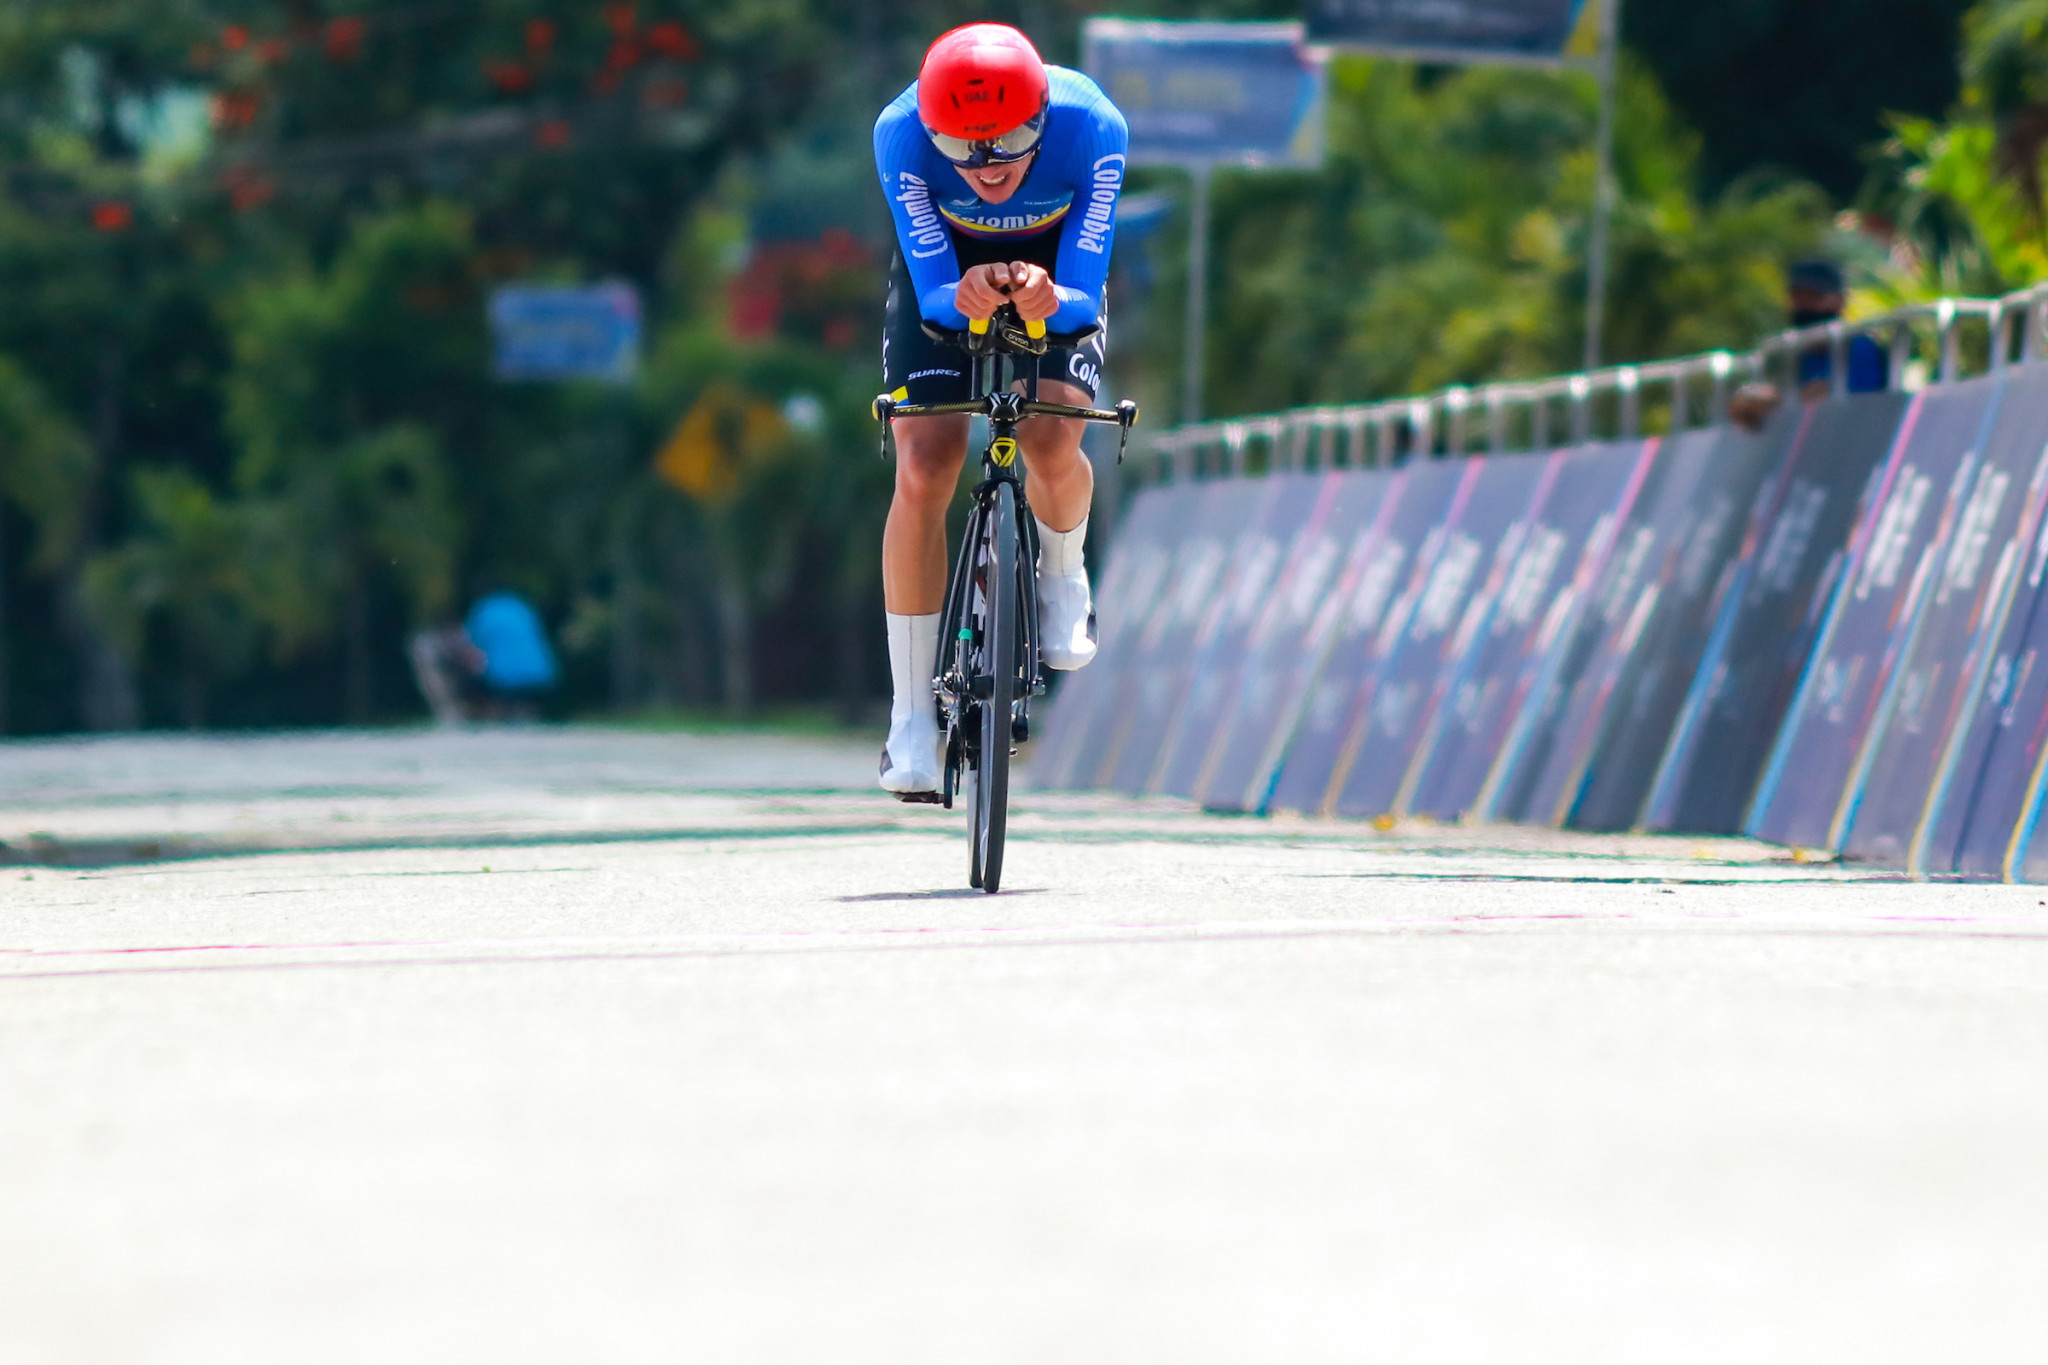 Victor Ocampo Giraldo ensured a Colombian clean sweep as he won the men's individual time trial race ©Agencia.Xpress Media